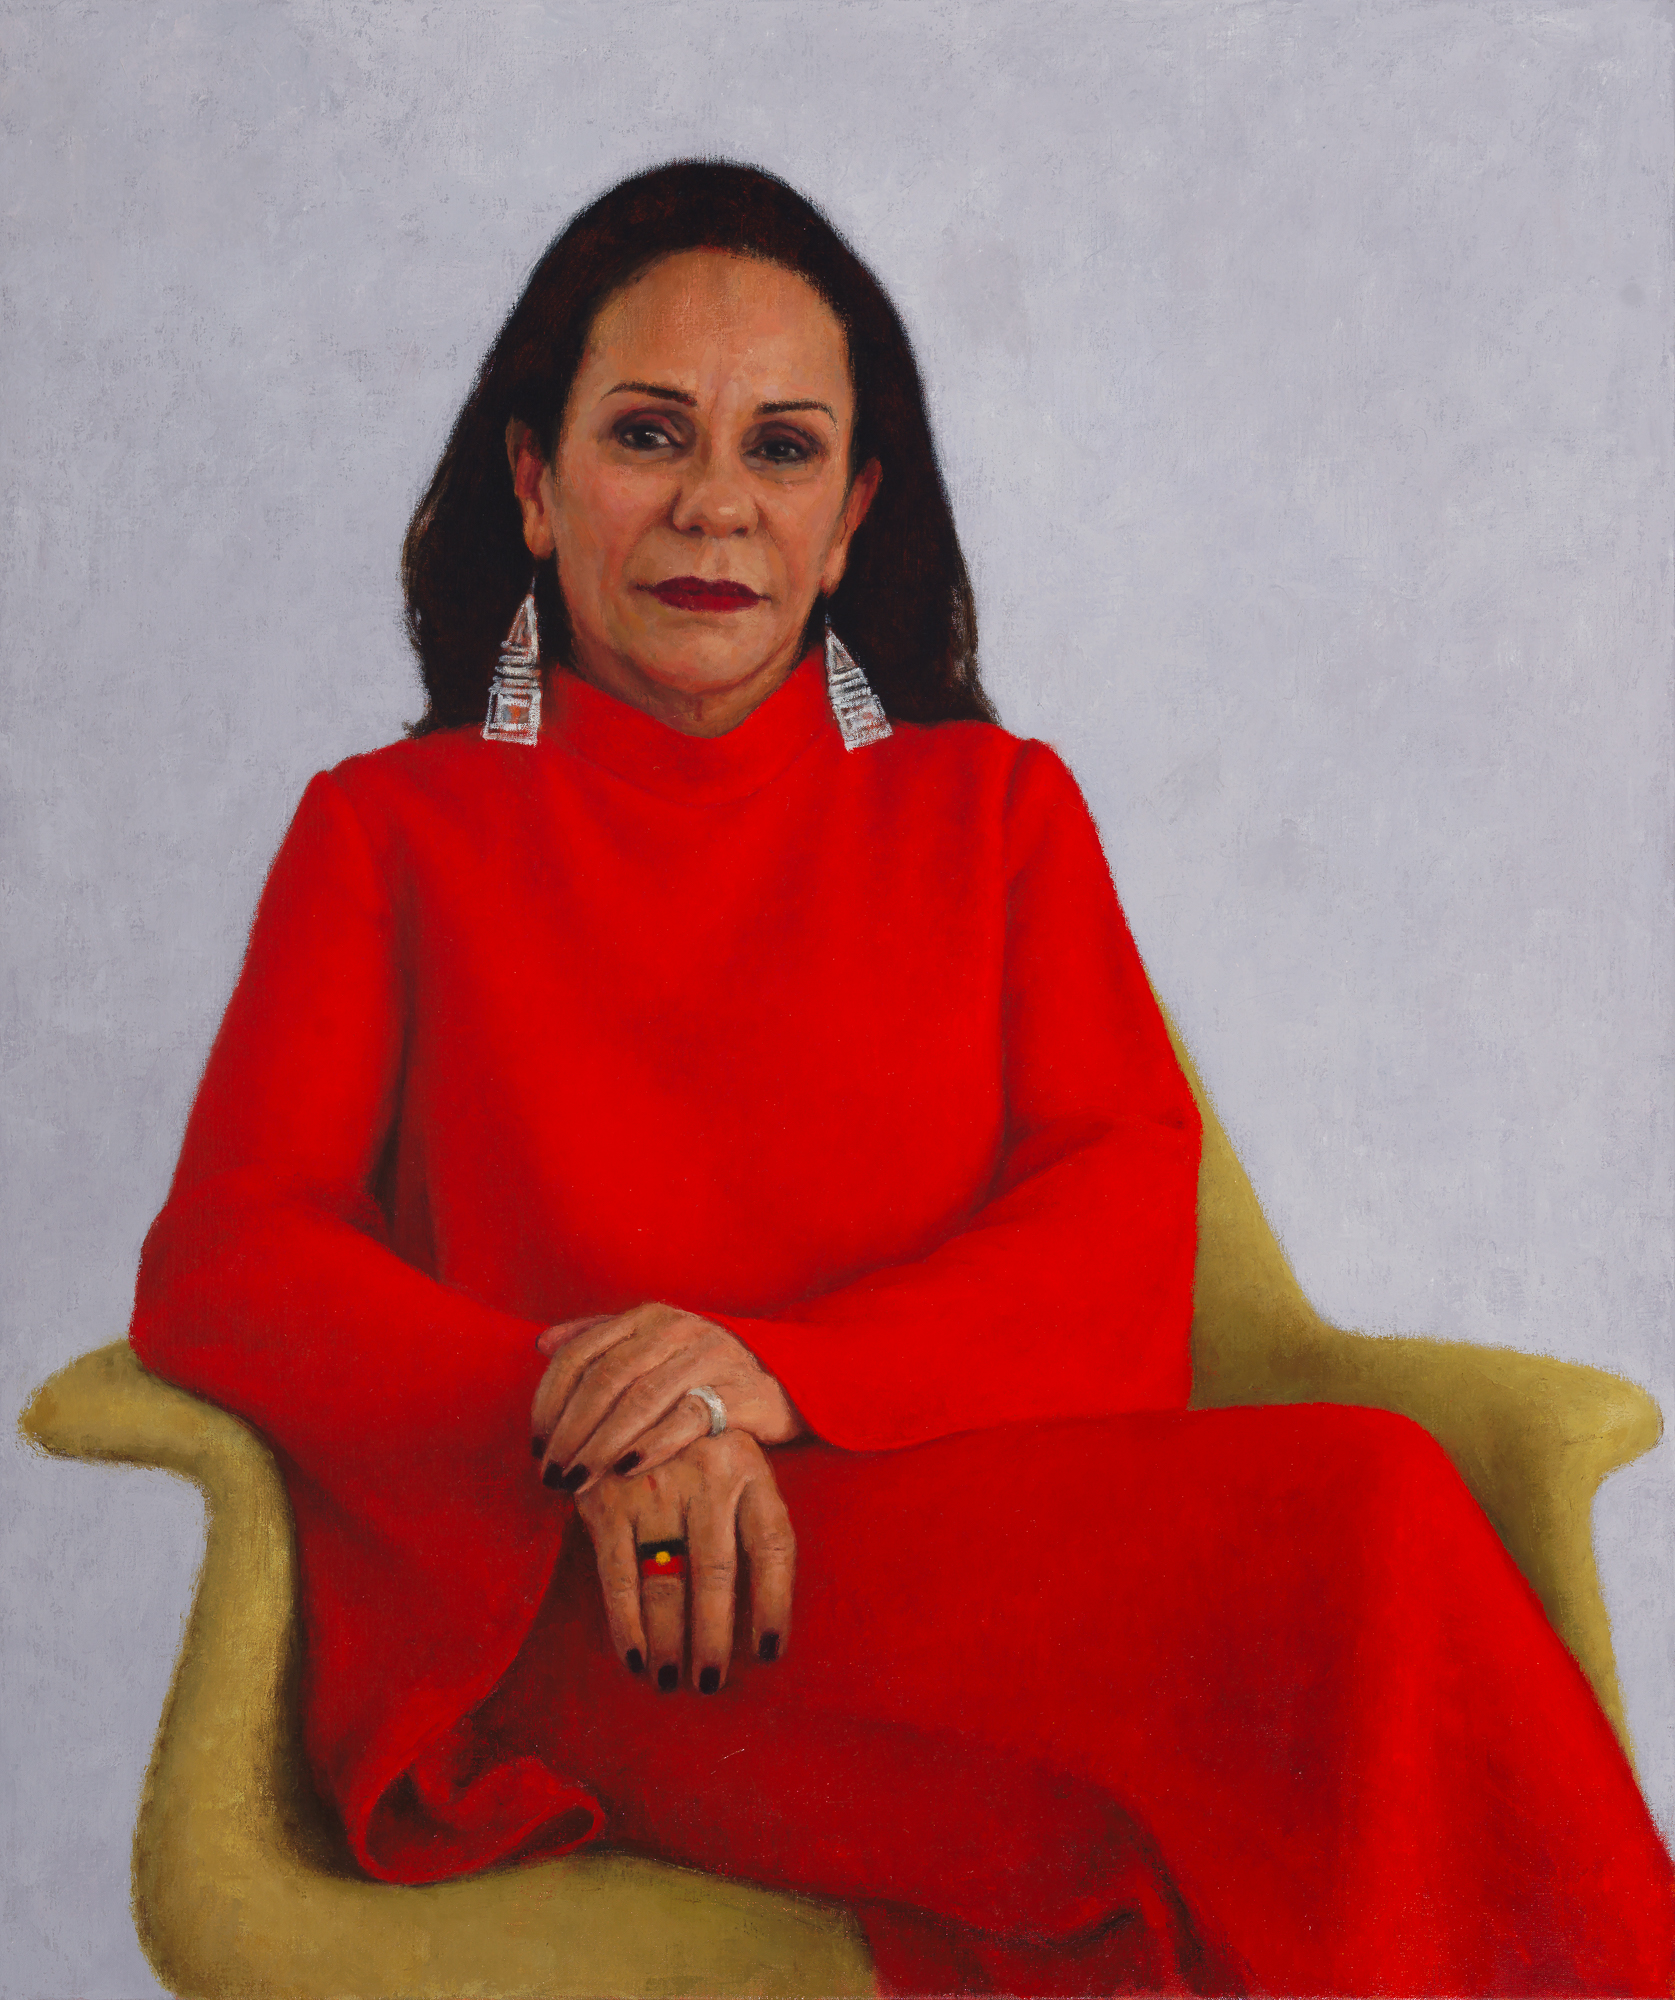 A portrait painting of Linda Burney, a Wiradjuri woman with dark hair wearing a vibrant red top and matching pant suit.